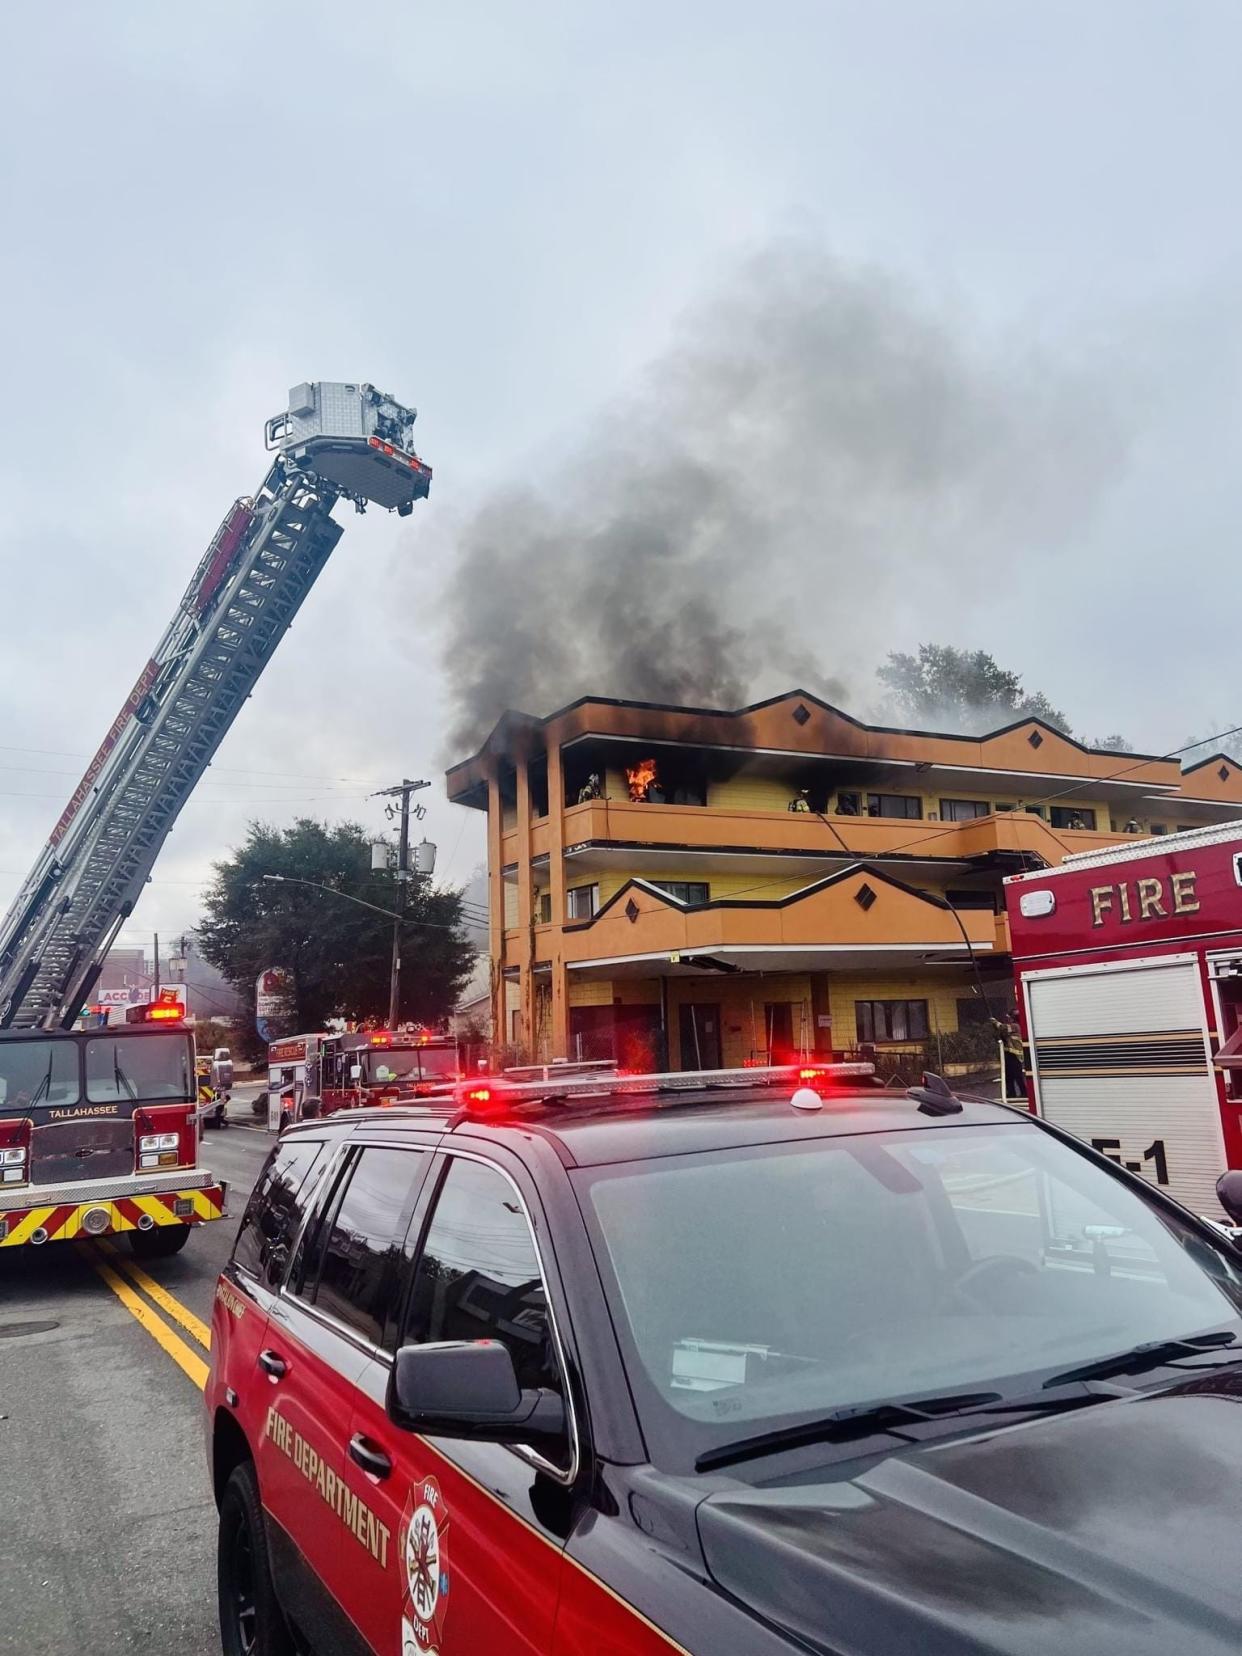 Firefighters knocked down a blaze in a former hotel on the corner of Tennessee and Dewey streets.